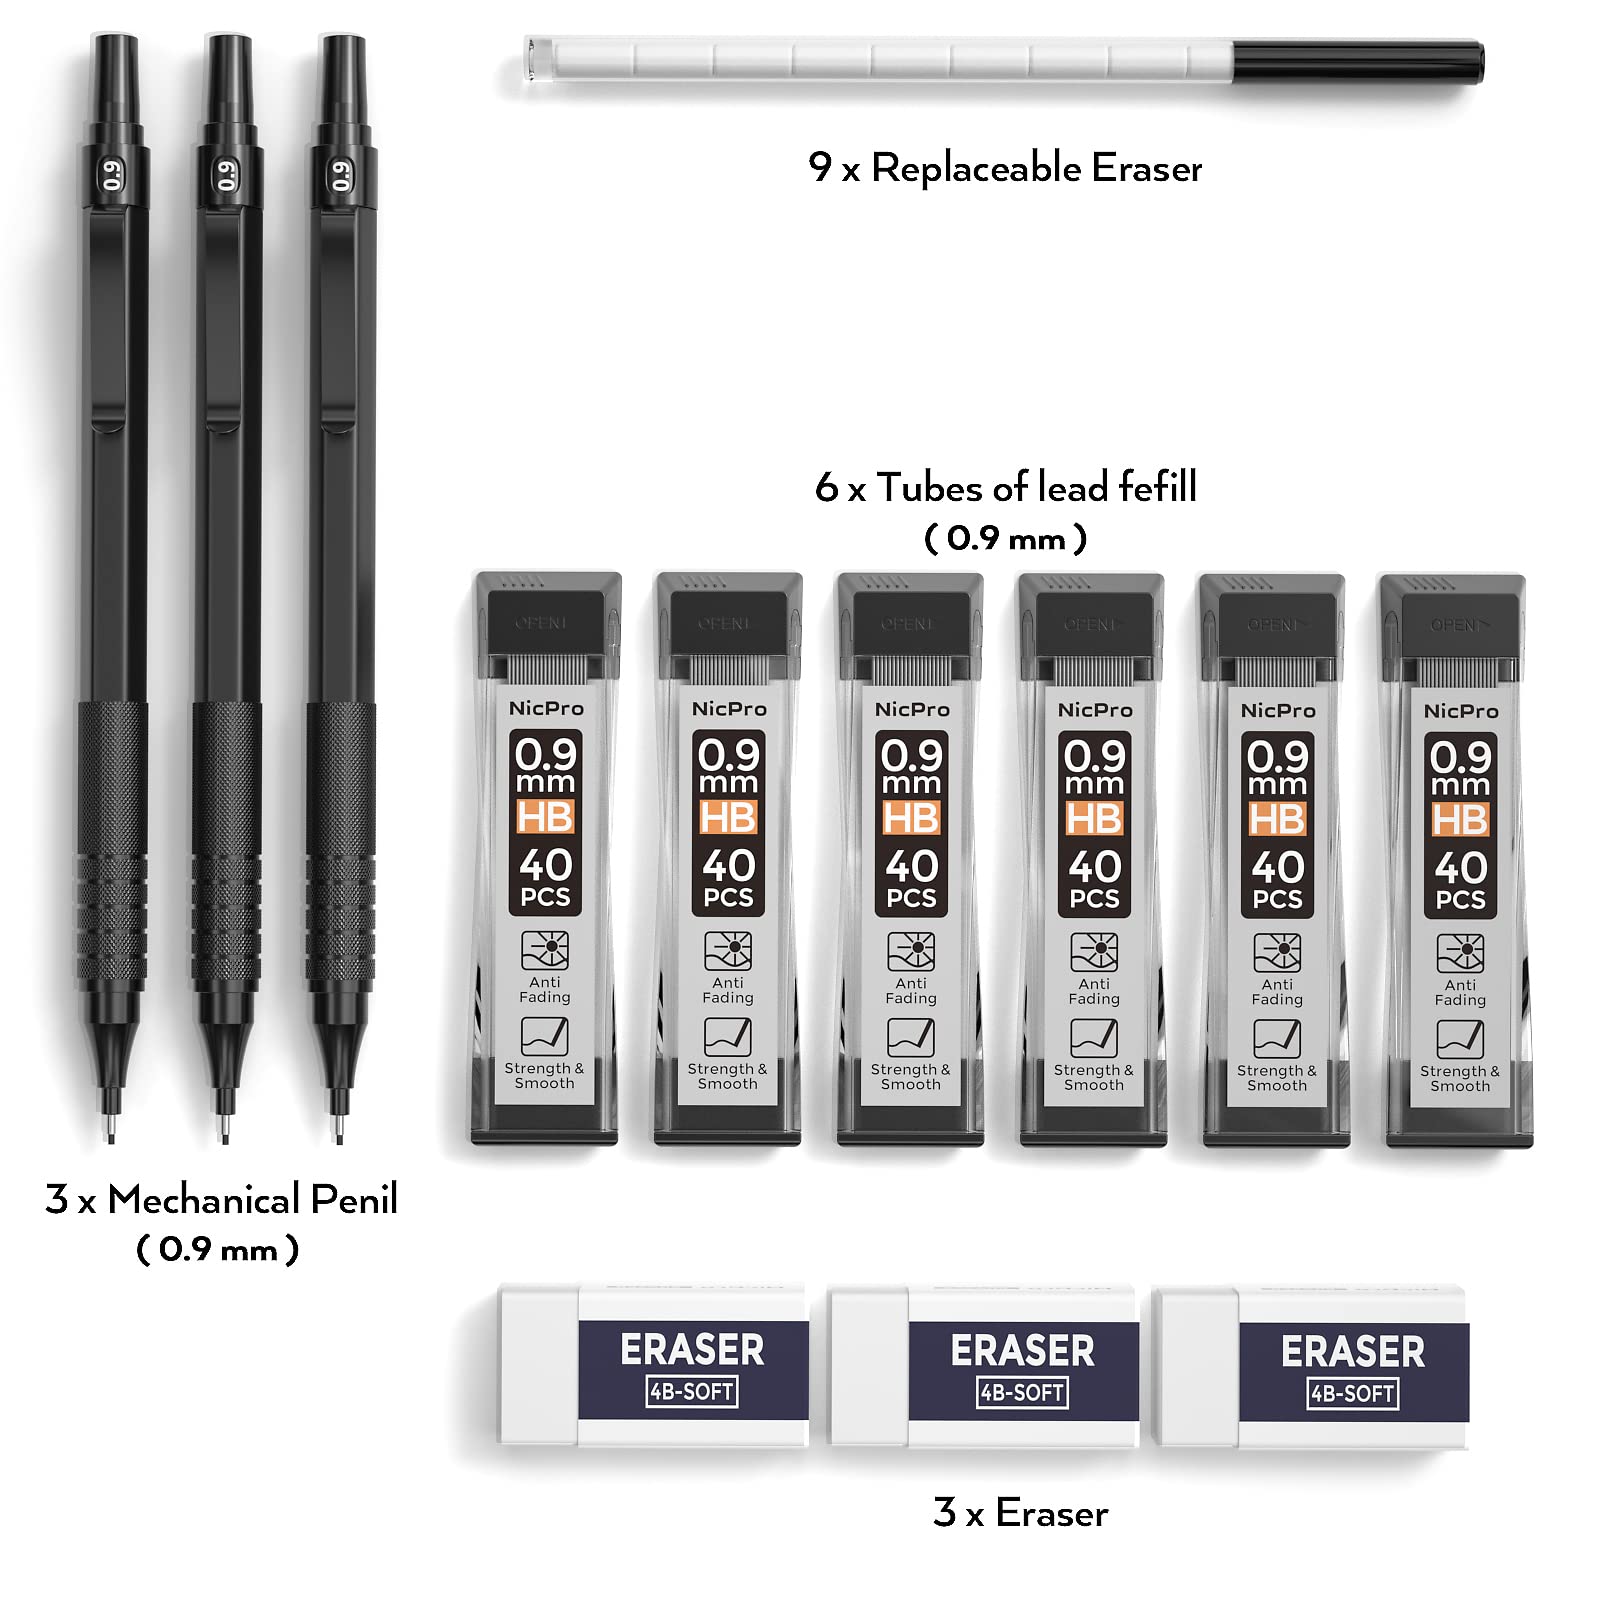 Nicpro Metal 0.9 mm Mechanical Pencils Set with Case, 3PCS Black 0.9mm Drafting Pencil, 6 Tubes HB Lead Refills, 3PCS Erasers, Erasers Refills for Adults, Children, Artist Writing, Drawing, Sketching